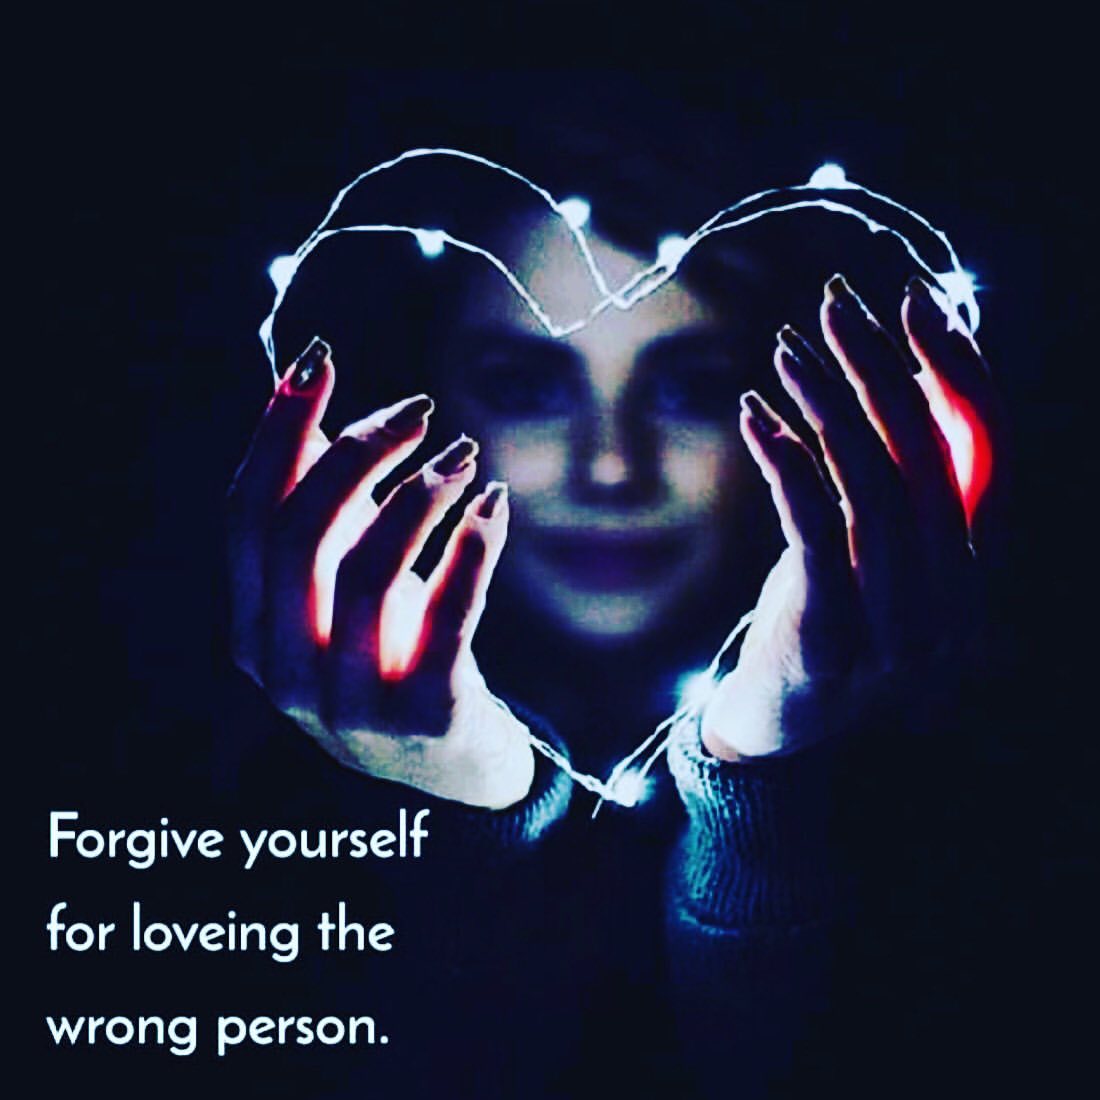 Forgive yourself for loveing the wrong person.